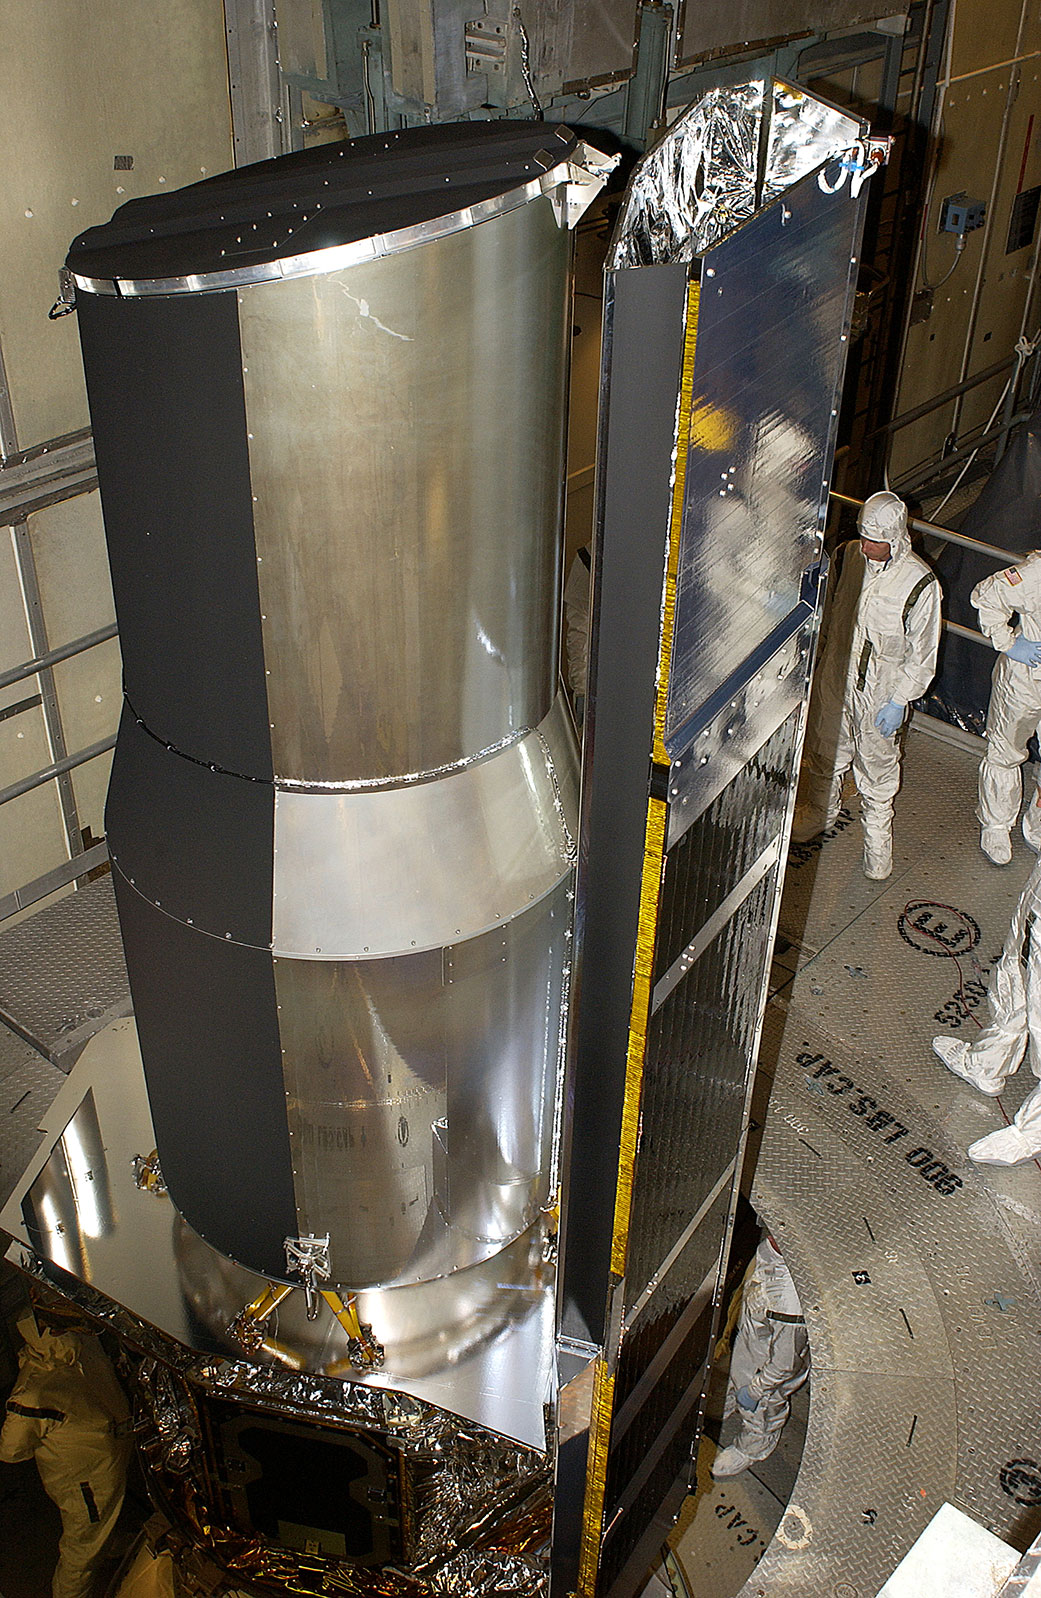 Spitzer Space Telescope (formerly the Space Infrared Telescope Facility or SIRTF) is readied for launch